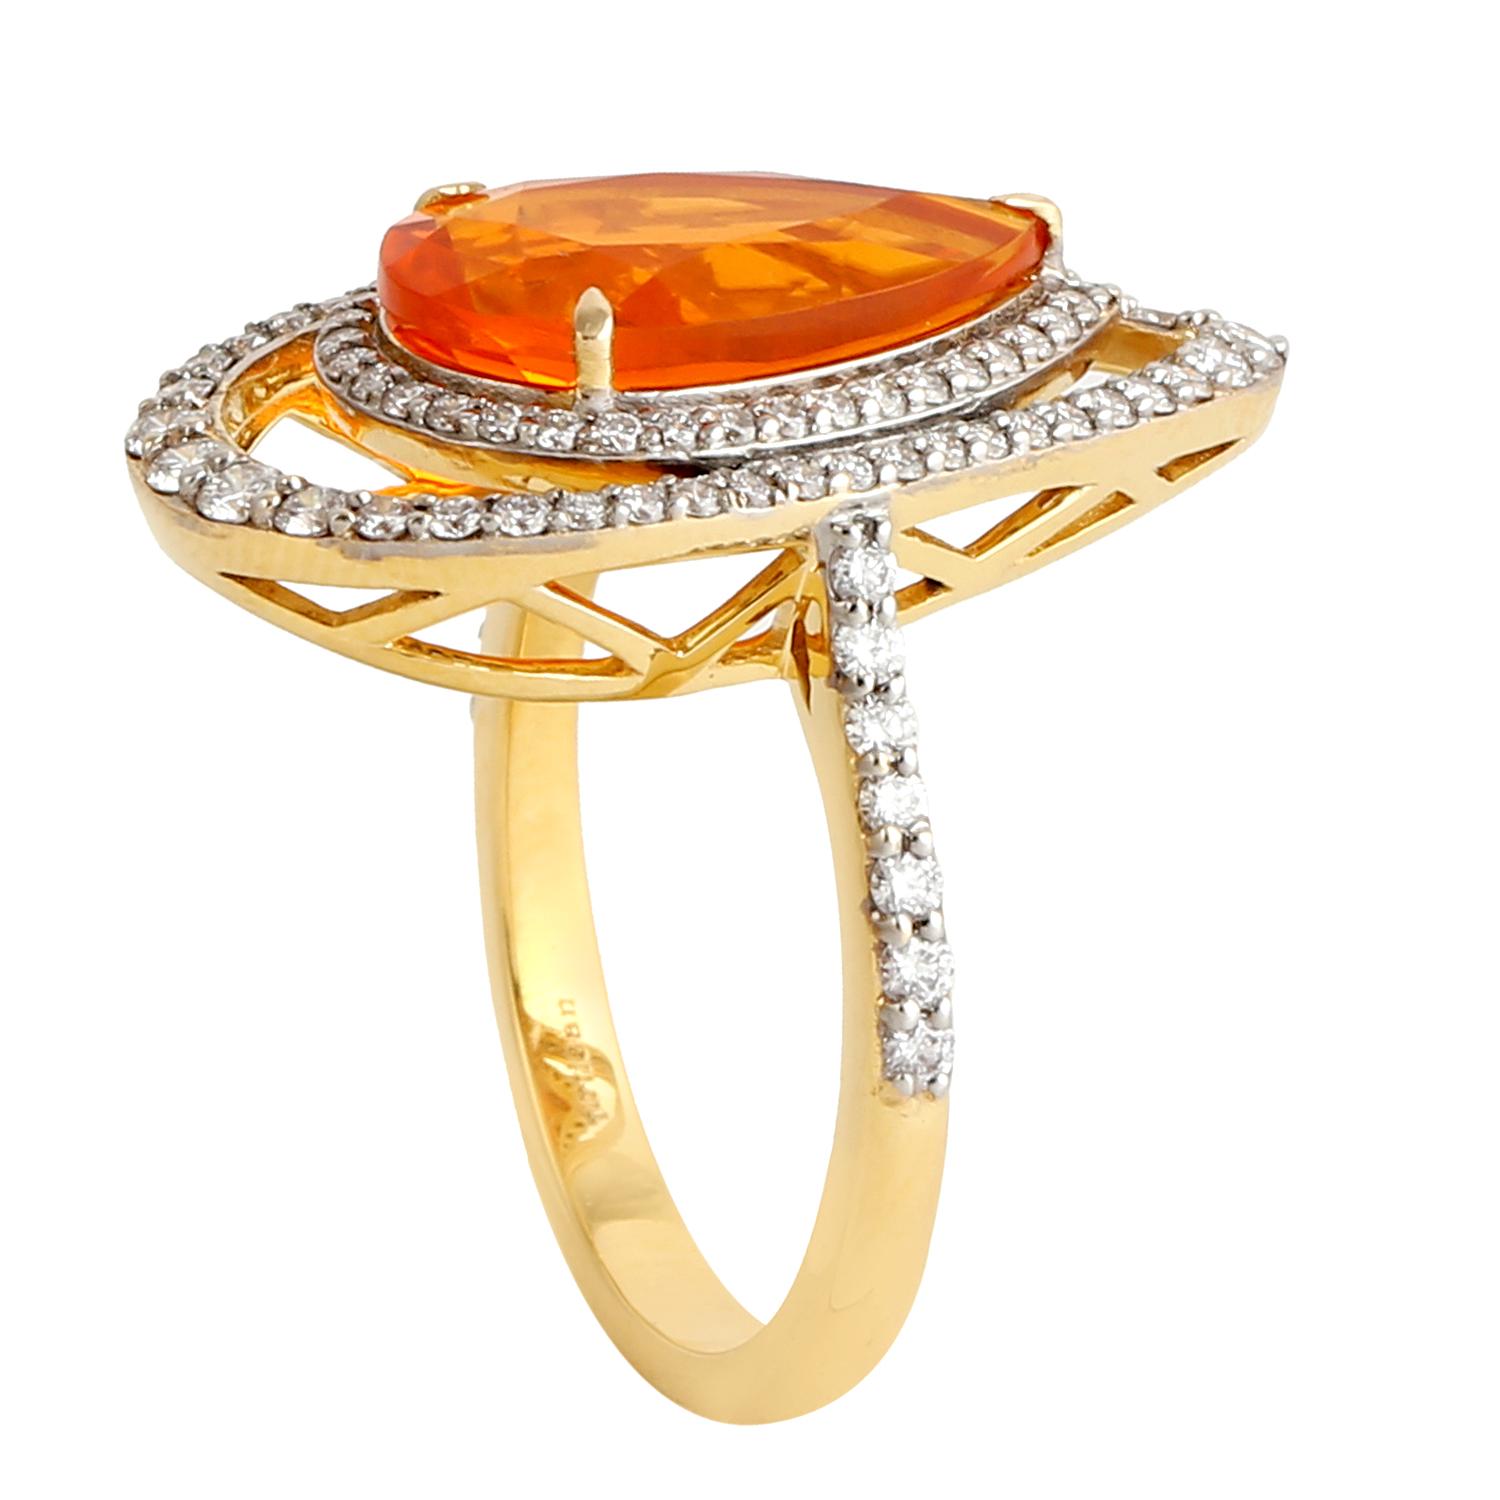 Mixed Cut Pear Shaped Fire Opal Cocktail Ring With Diamonds Made In 18k Yellow Gold For Sale